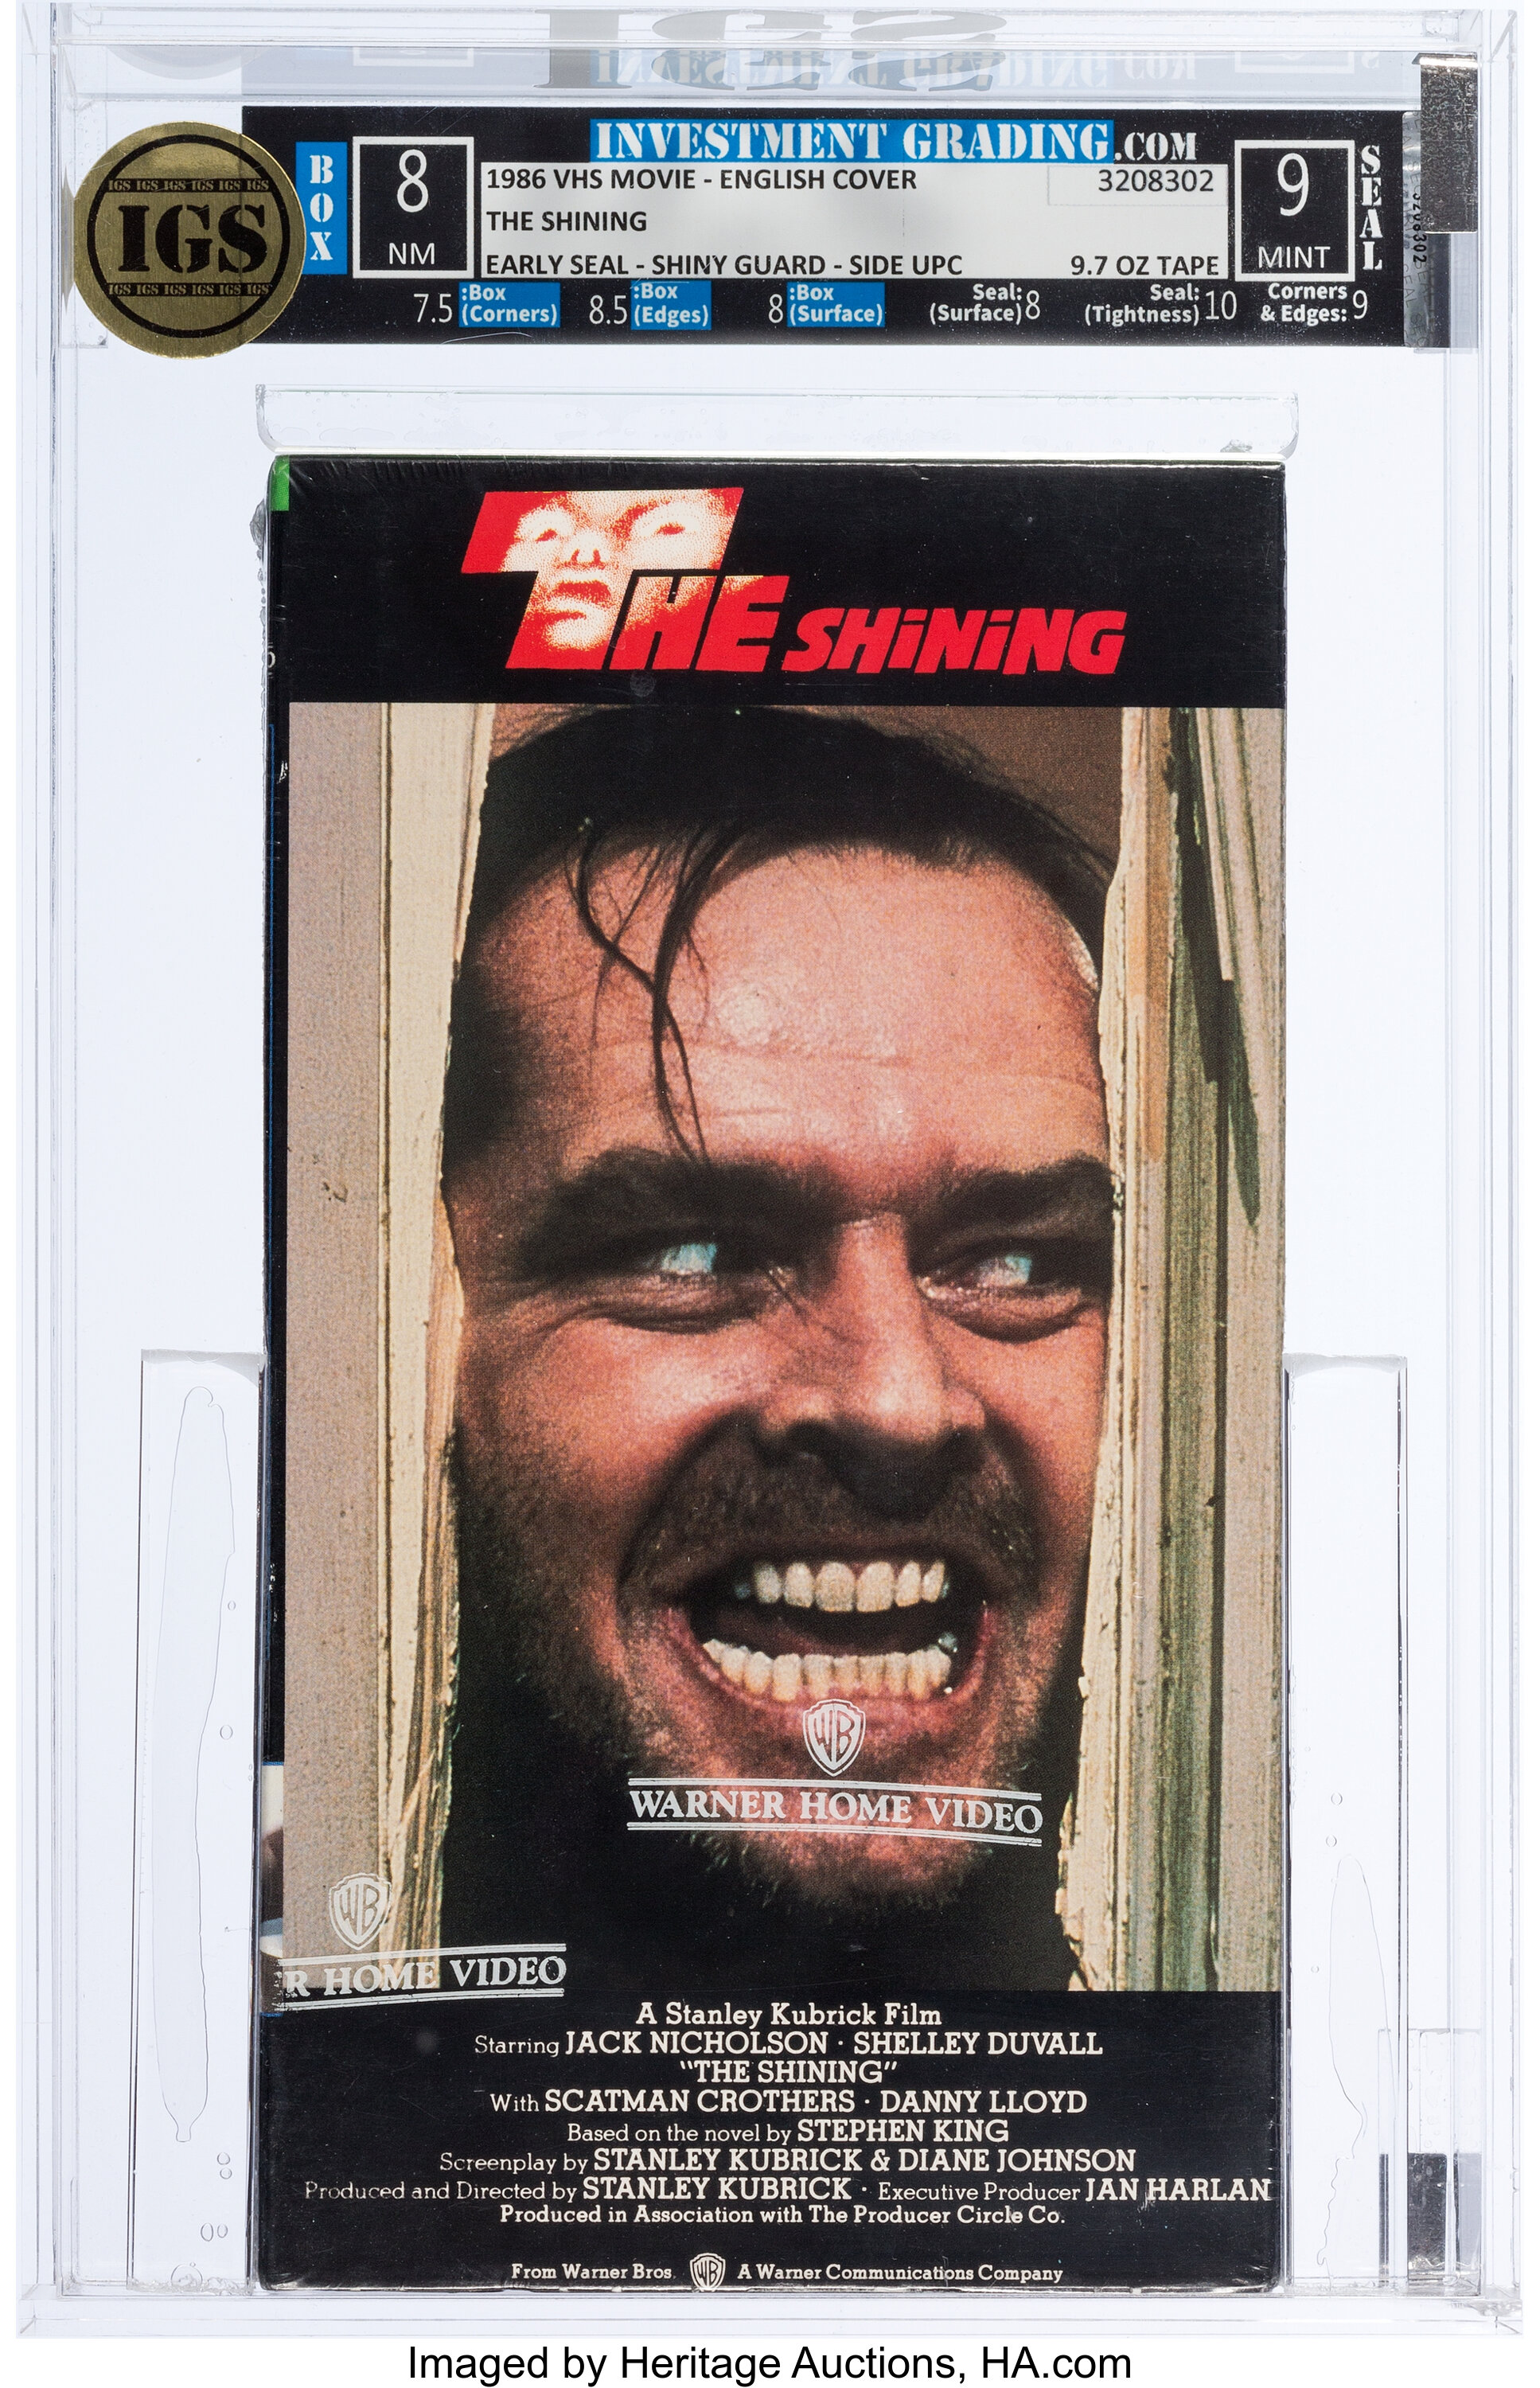 The Shining Vhs 1986 Igs Box 8 Nm And Seal 9 Mint Early Seal Lot 19078 Heritage Auctions 5512